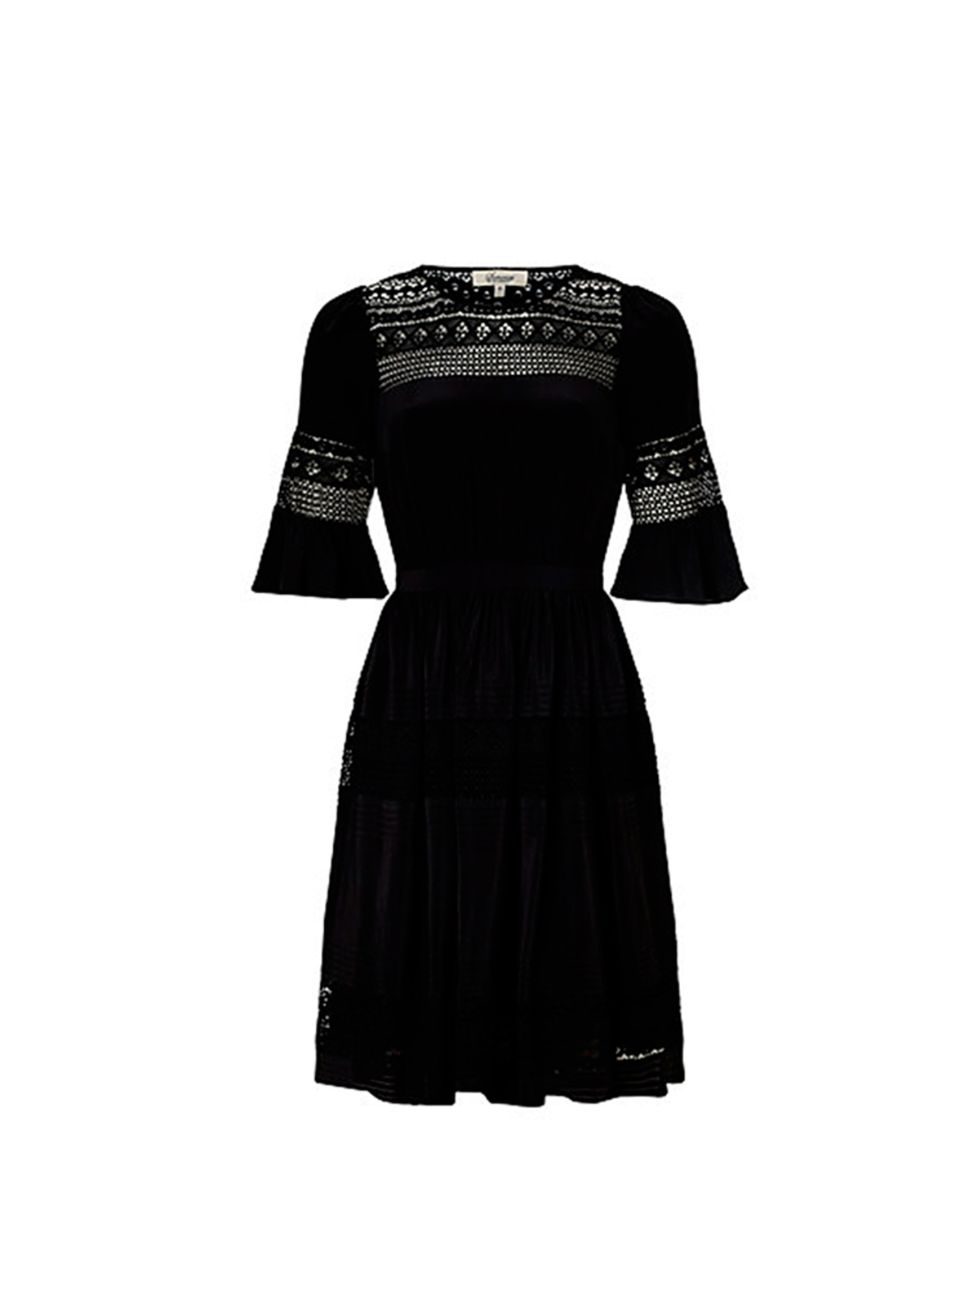 <p><a href="http://www.johnlewis.com/somerset-by-alice-temperley-lace-insert-dress-black/p1938223" target="_blank">Somerset by Alice Temperley</a> dress, £160 available at johlewis.com</p>